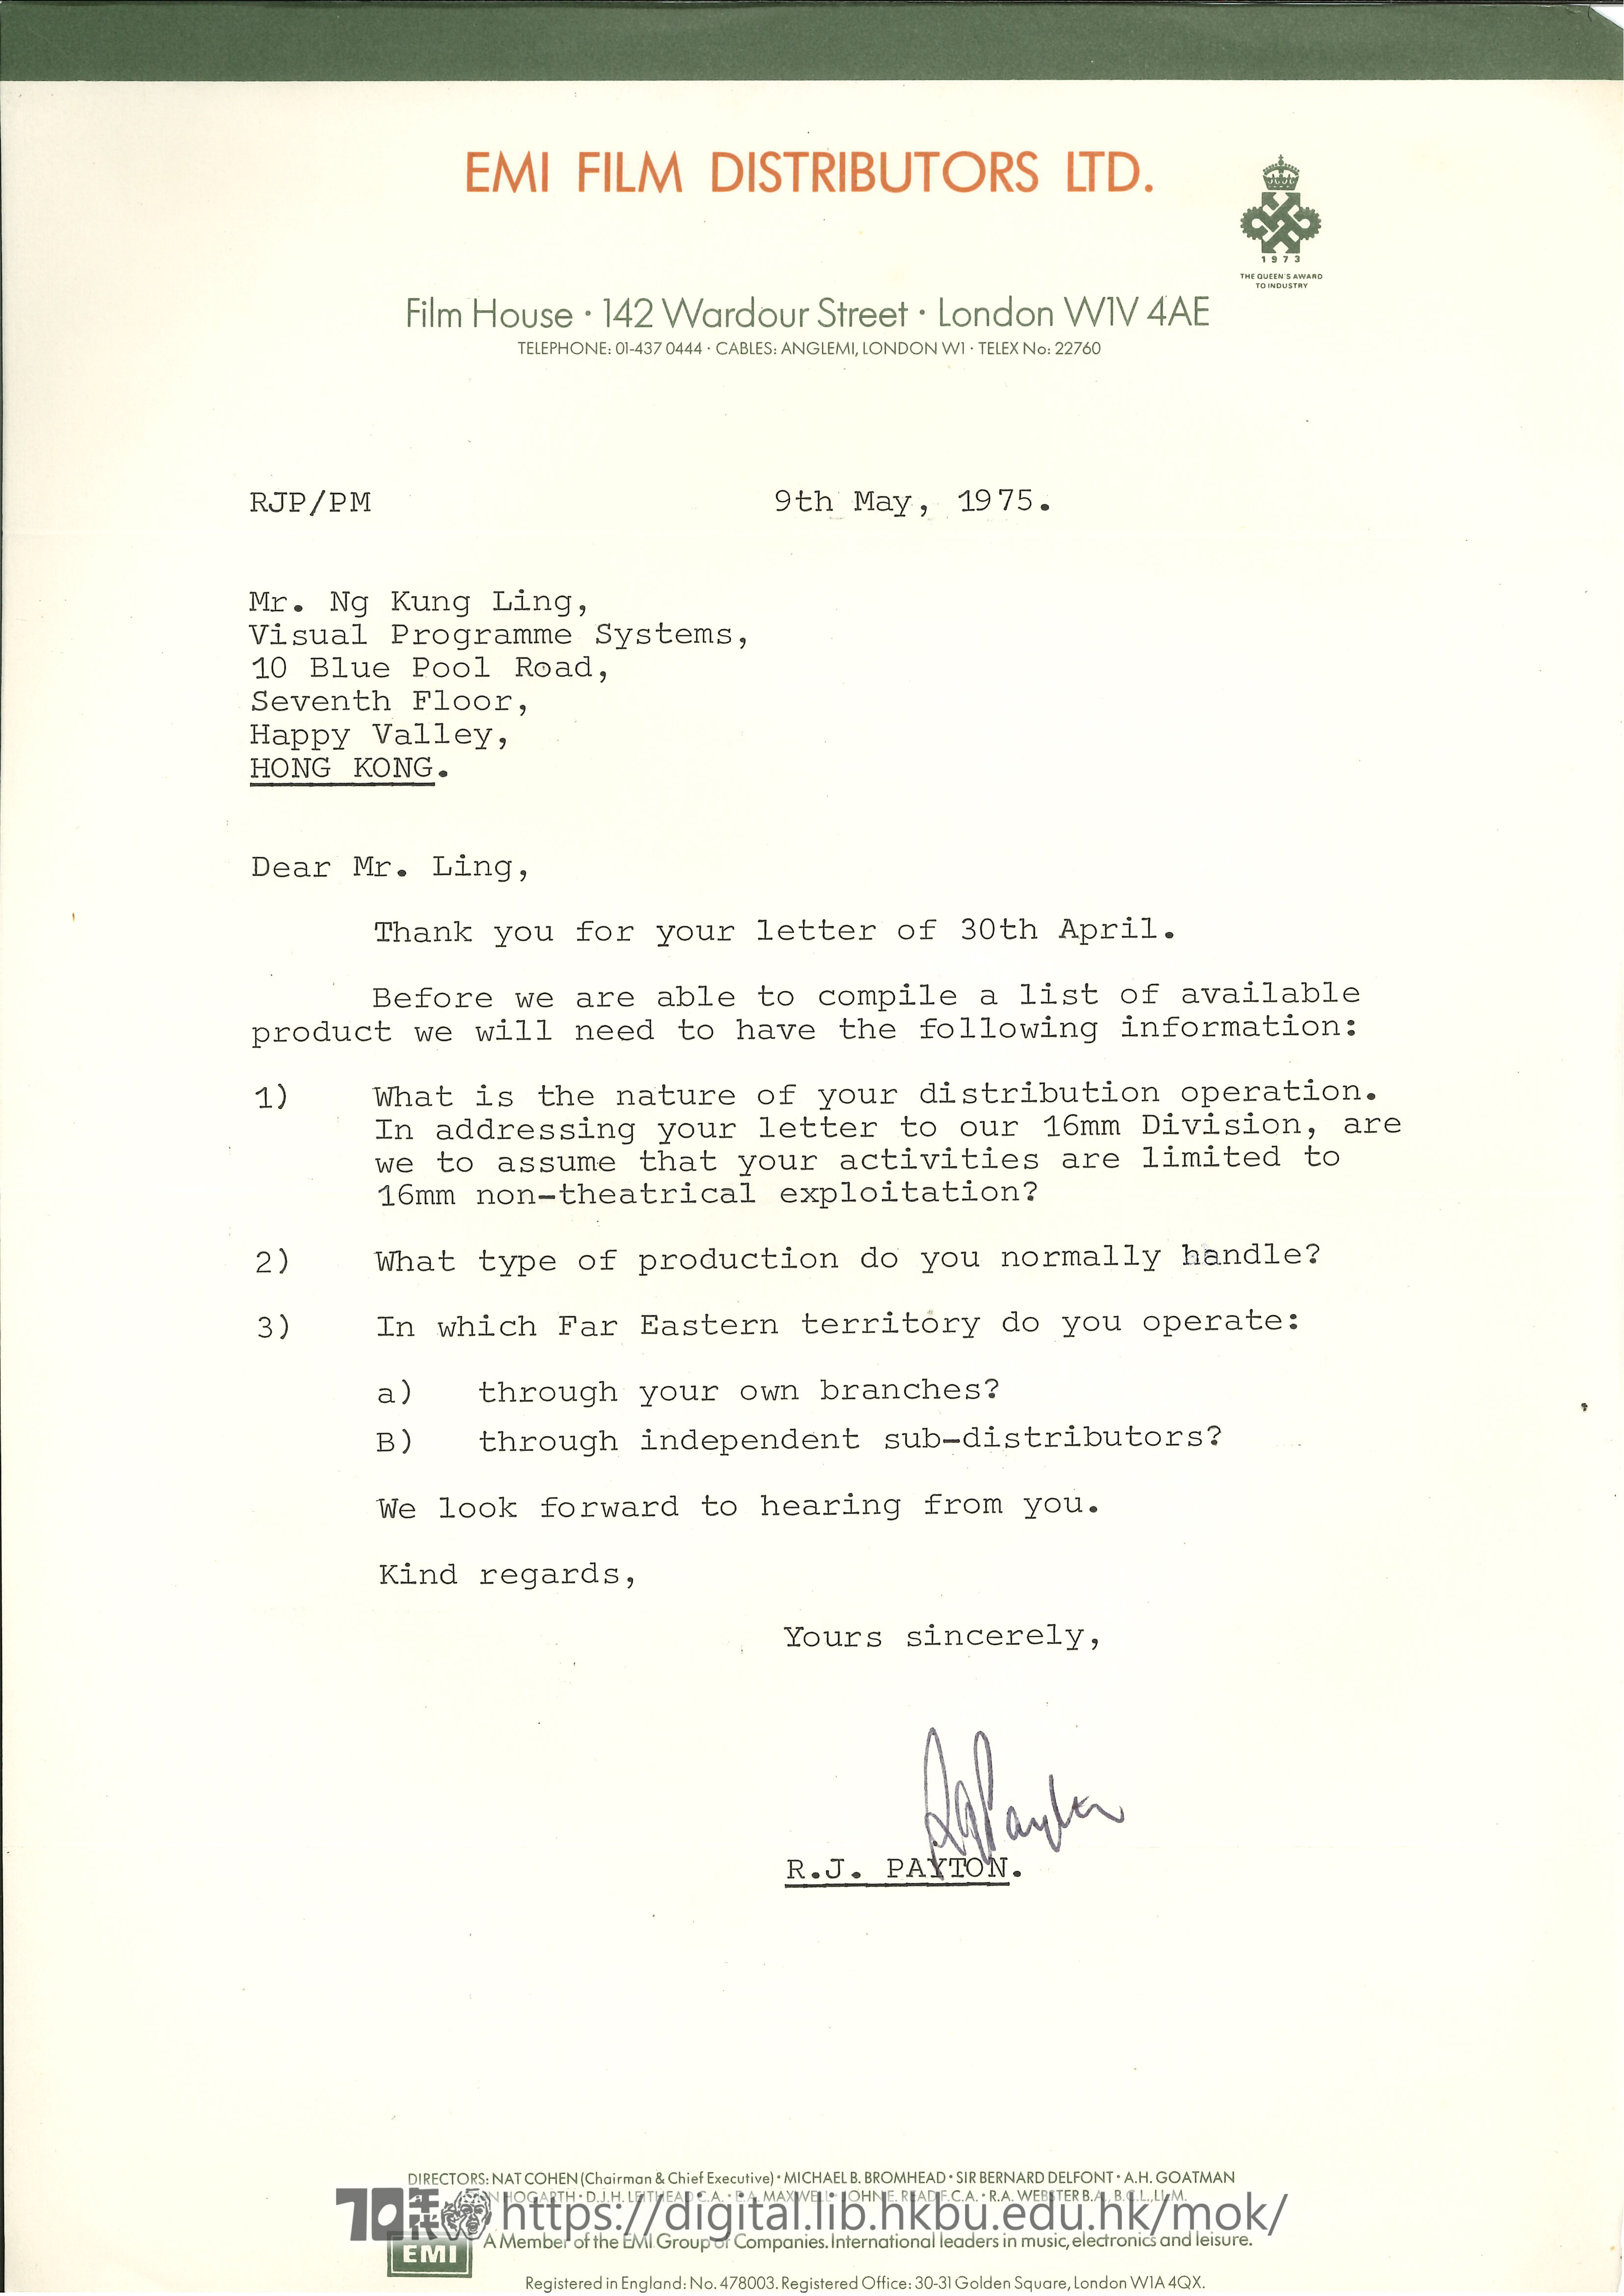   Letter from R.J. Payton to Ng Kung Ling PAYTON, R.J. 